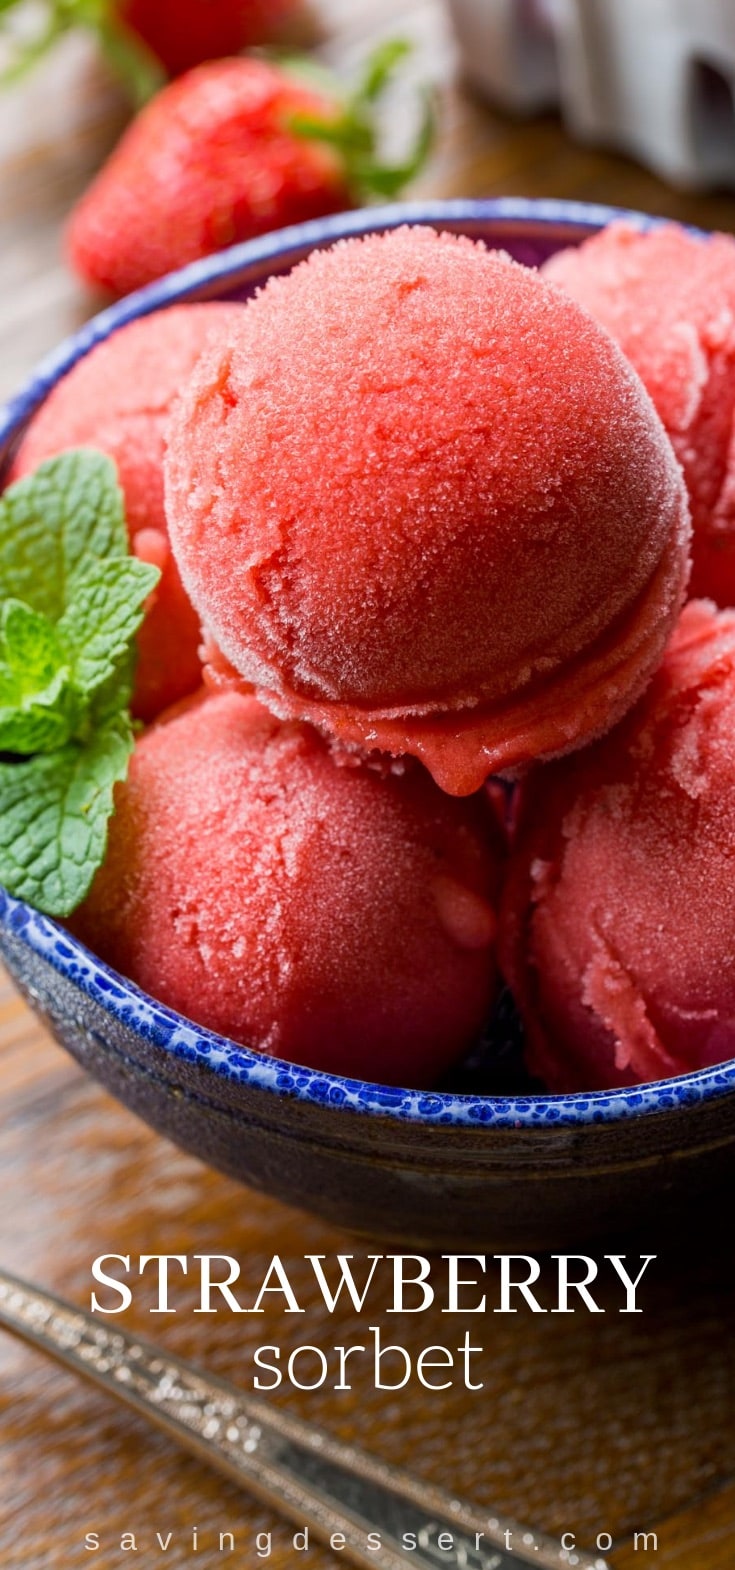 Strawberry Sorbet ~ a simple, easy and delicious sorbet made with only 3 ingredients right in your blender and ice cream maker! #sorbet #strawberrysorbet #easysorbet #strawberry #frozendessert #fruitdessert